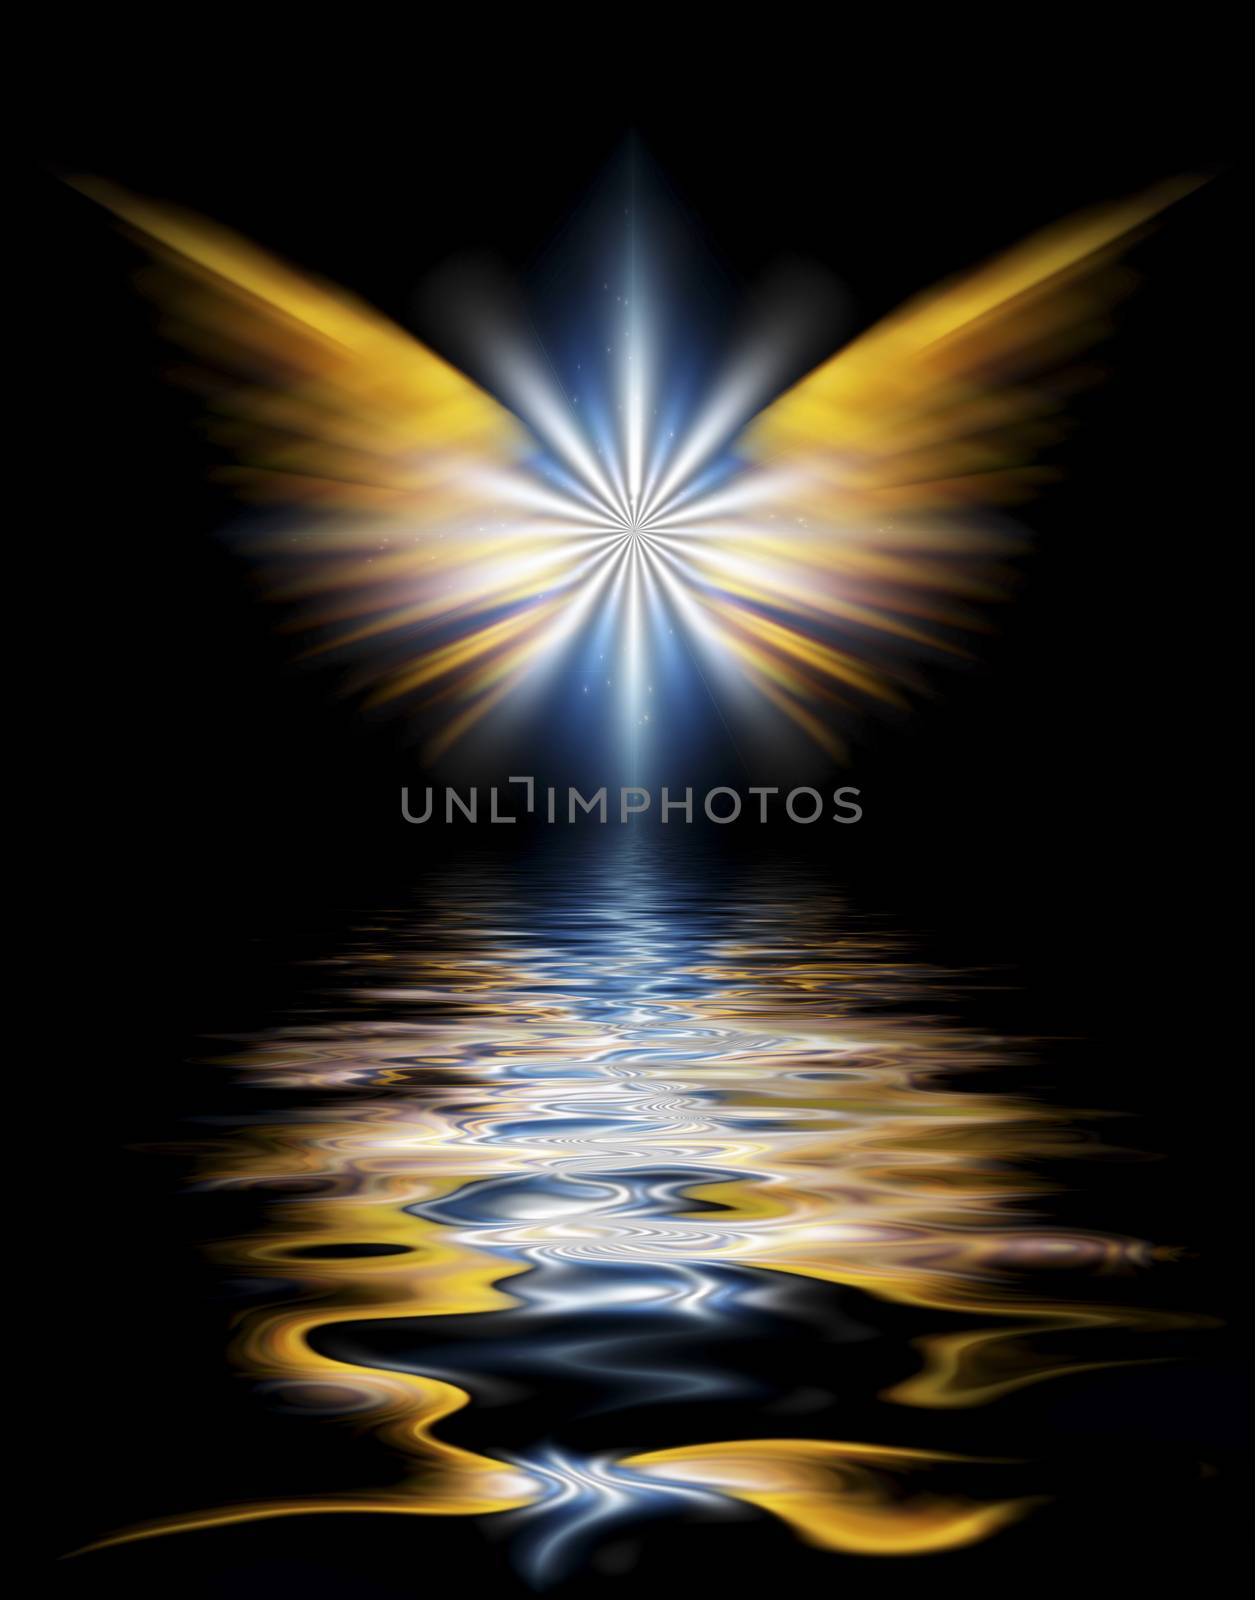 Shining angel wings above water surface